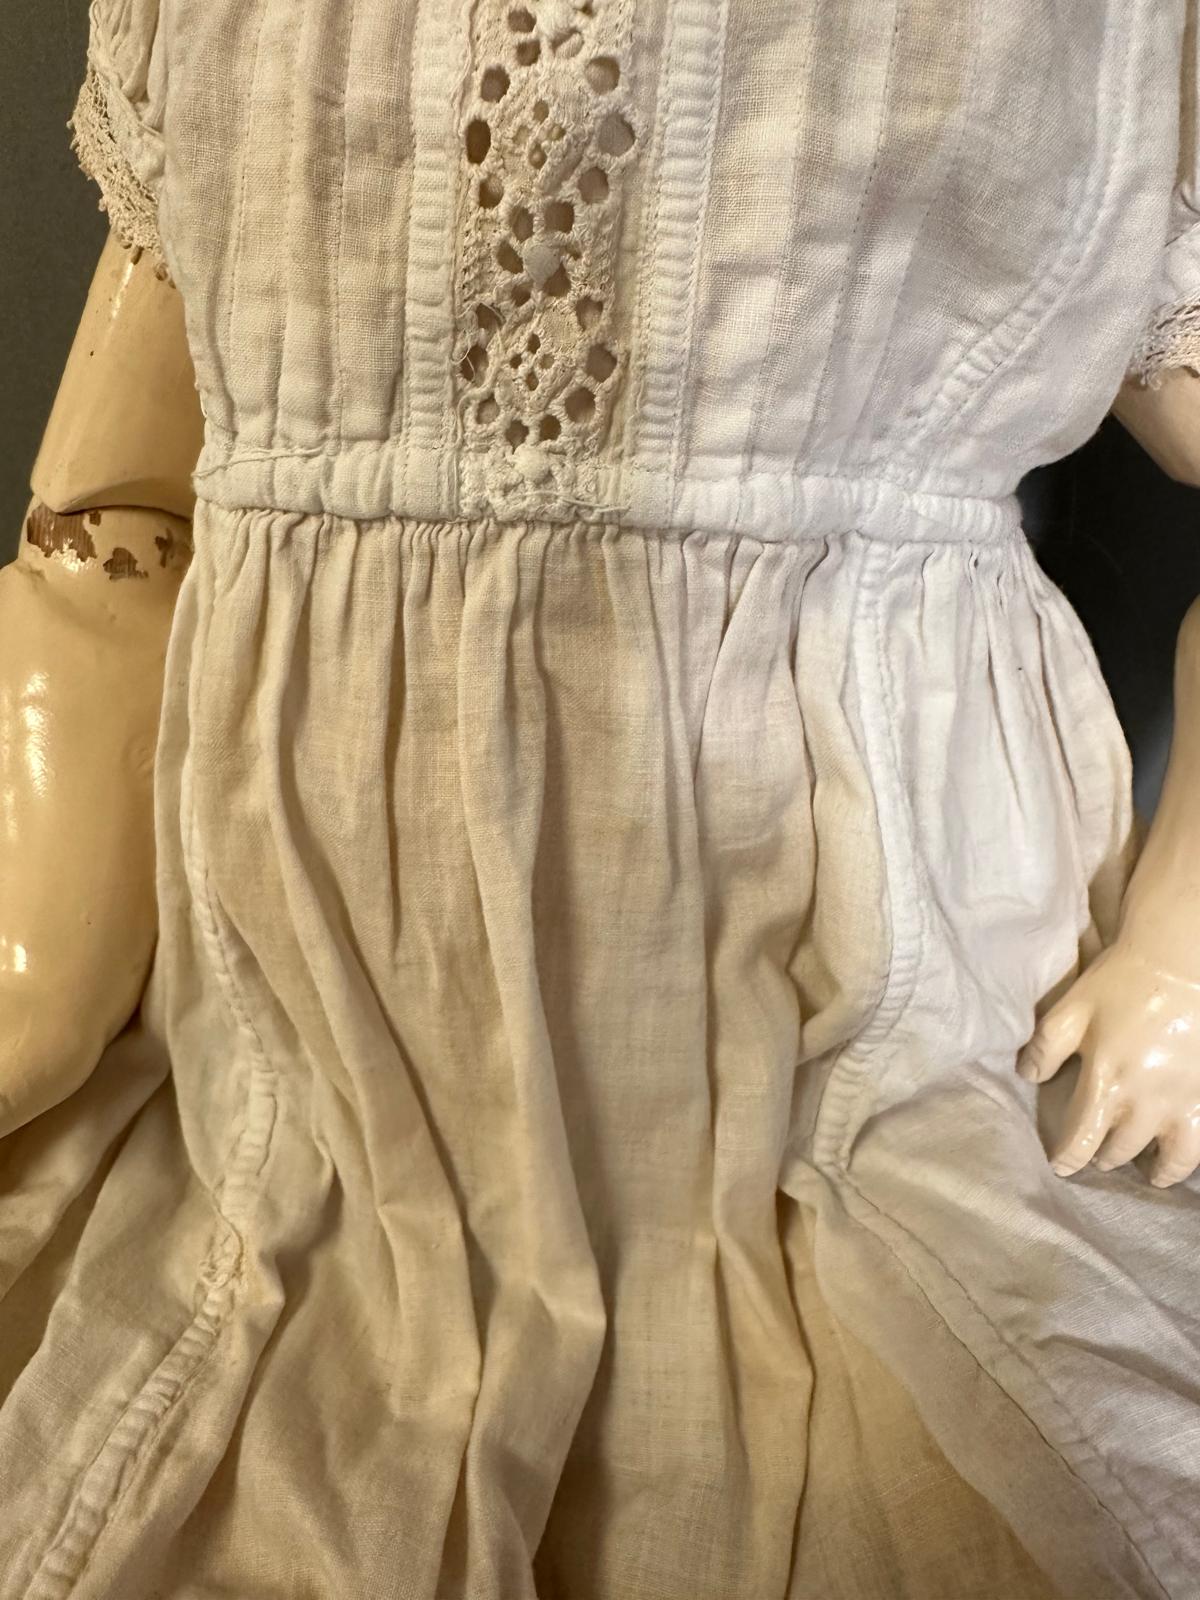 An antique German doll with carved wooden body - Image 6 of 6